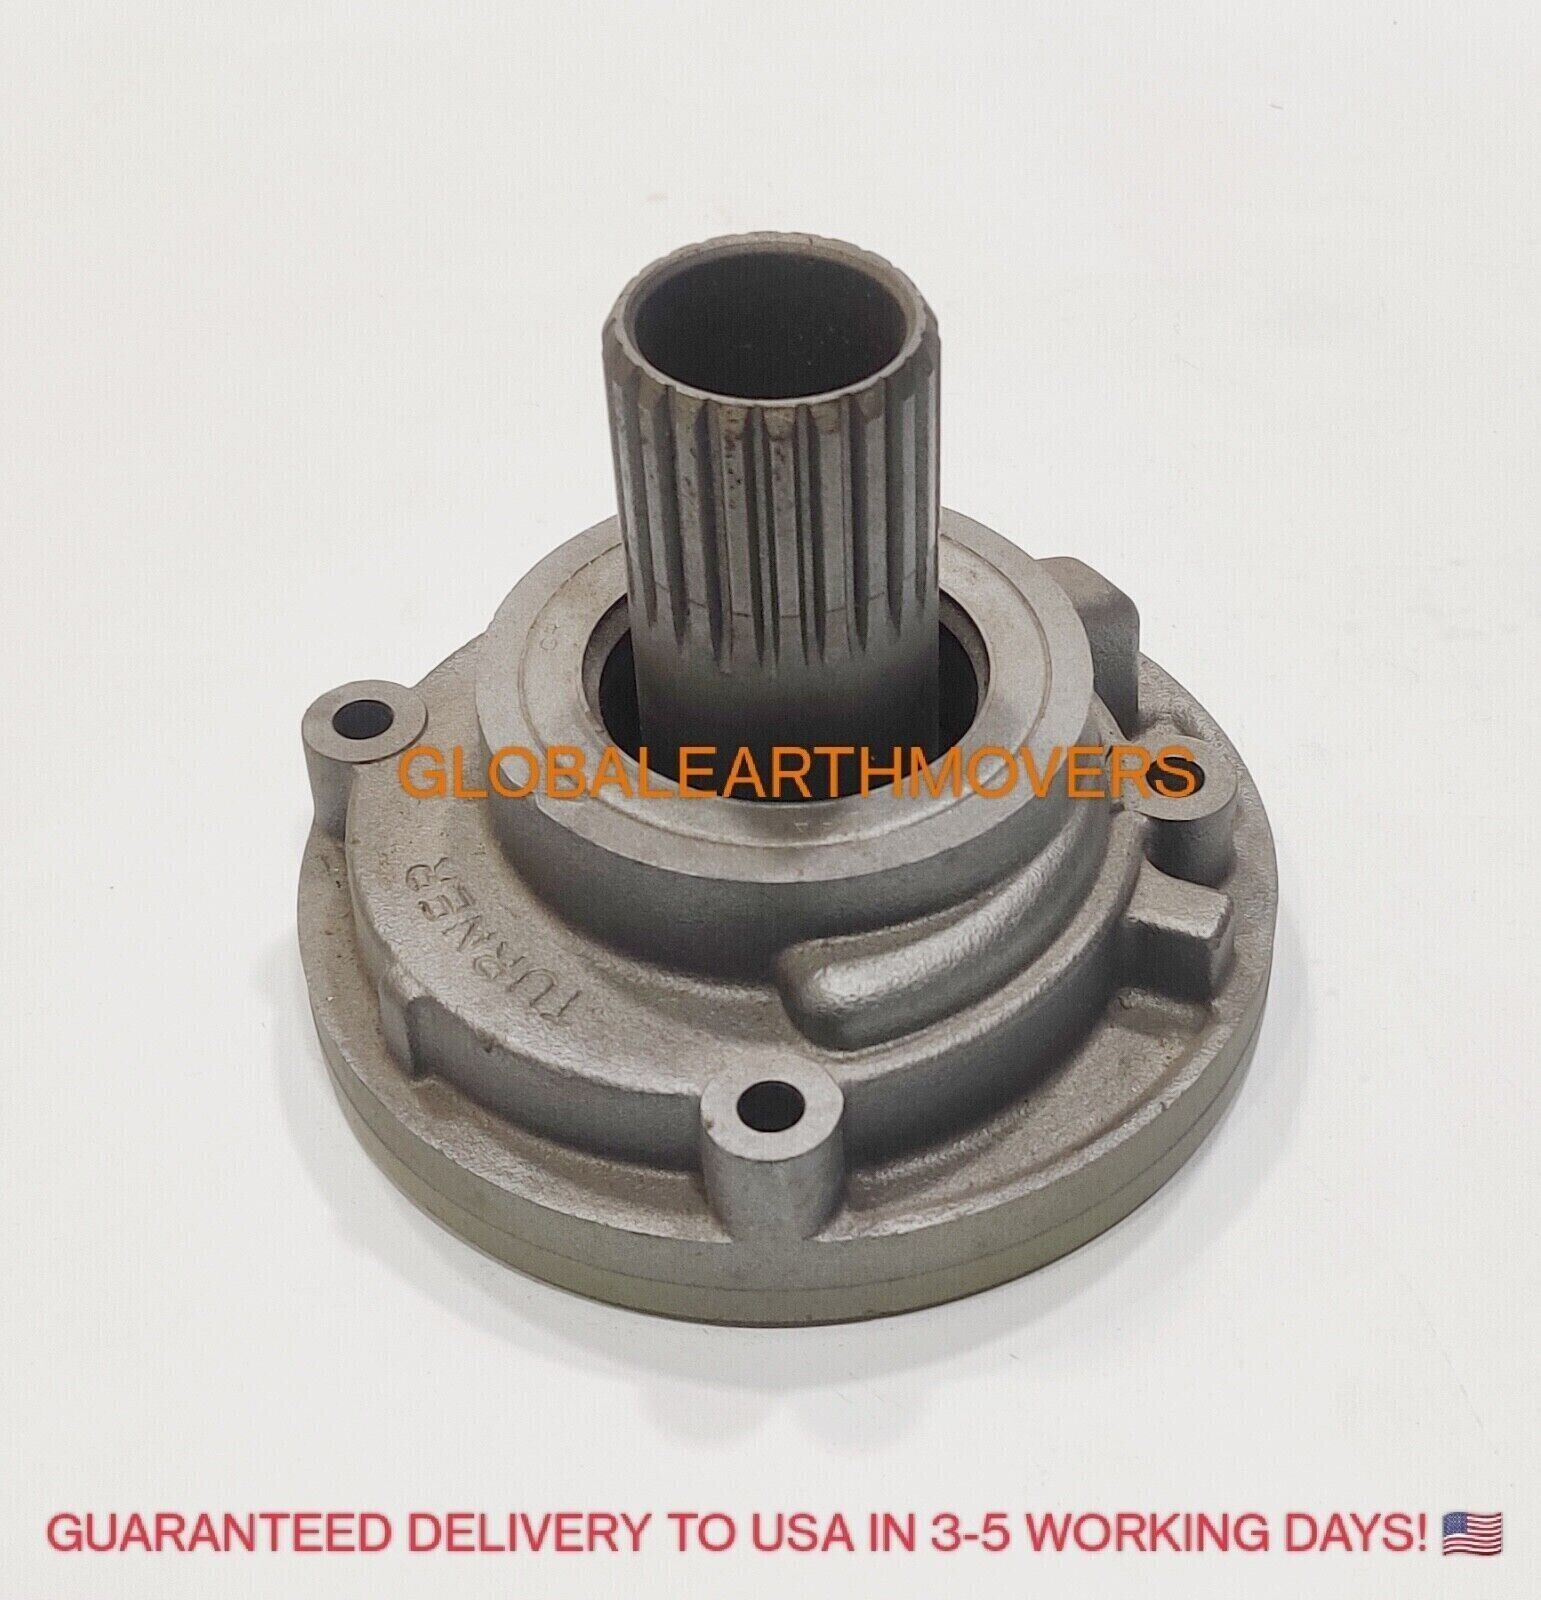 CAT PARTS - TRANSMISSION PUMP - OEM - MADE IN USA (PART NO. 6Y3864 9W5426)